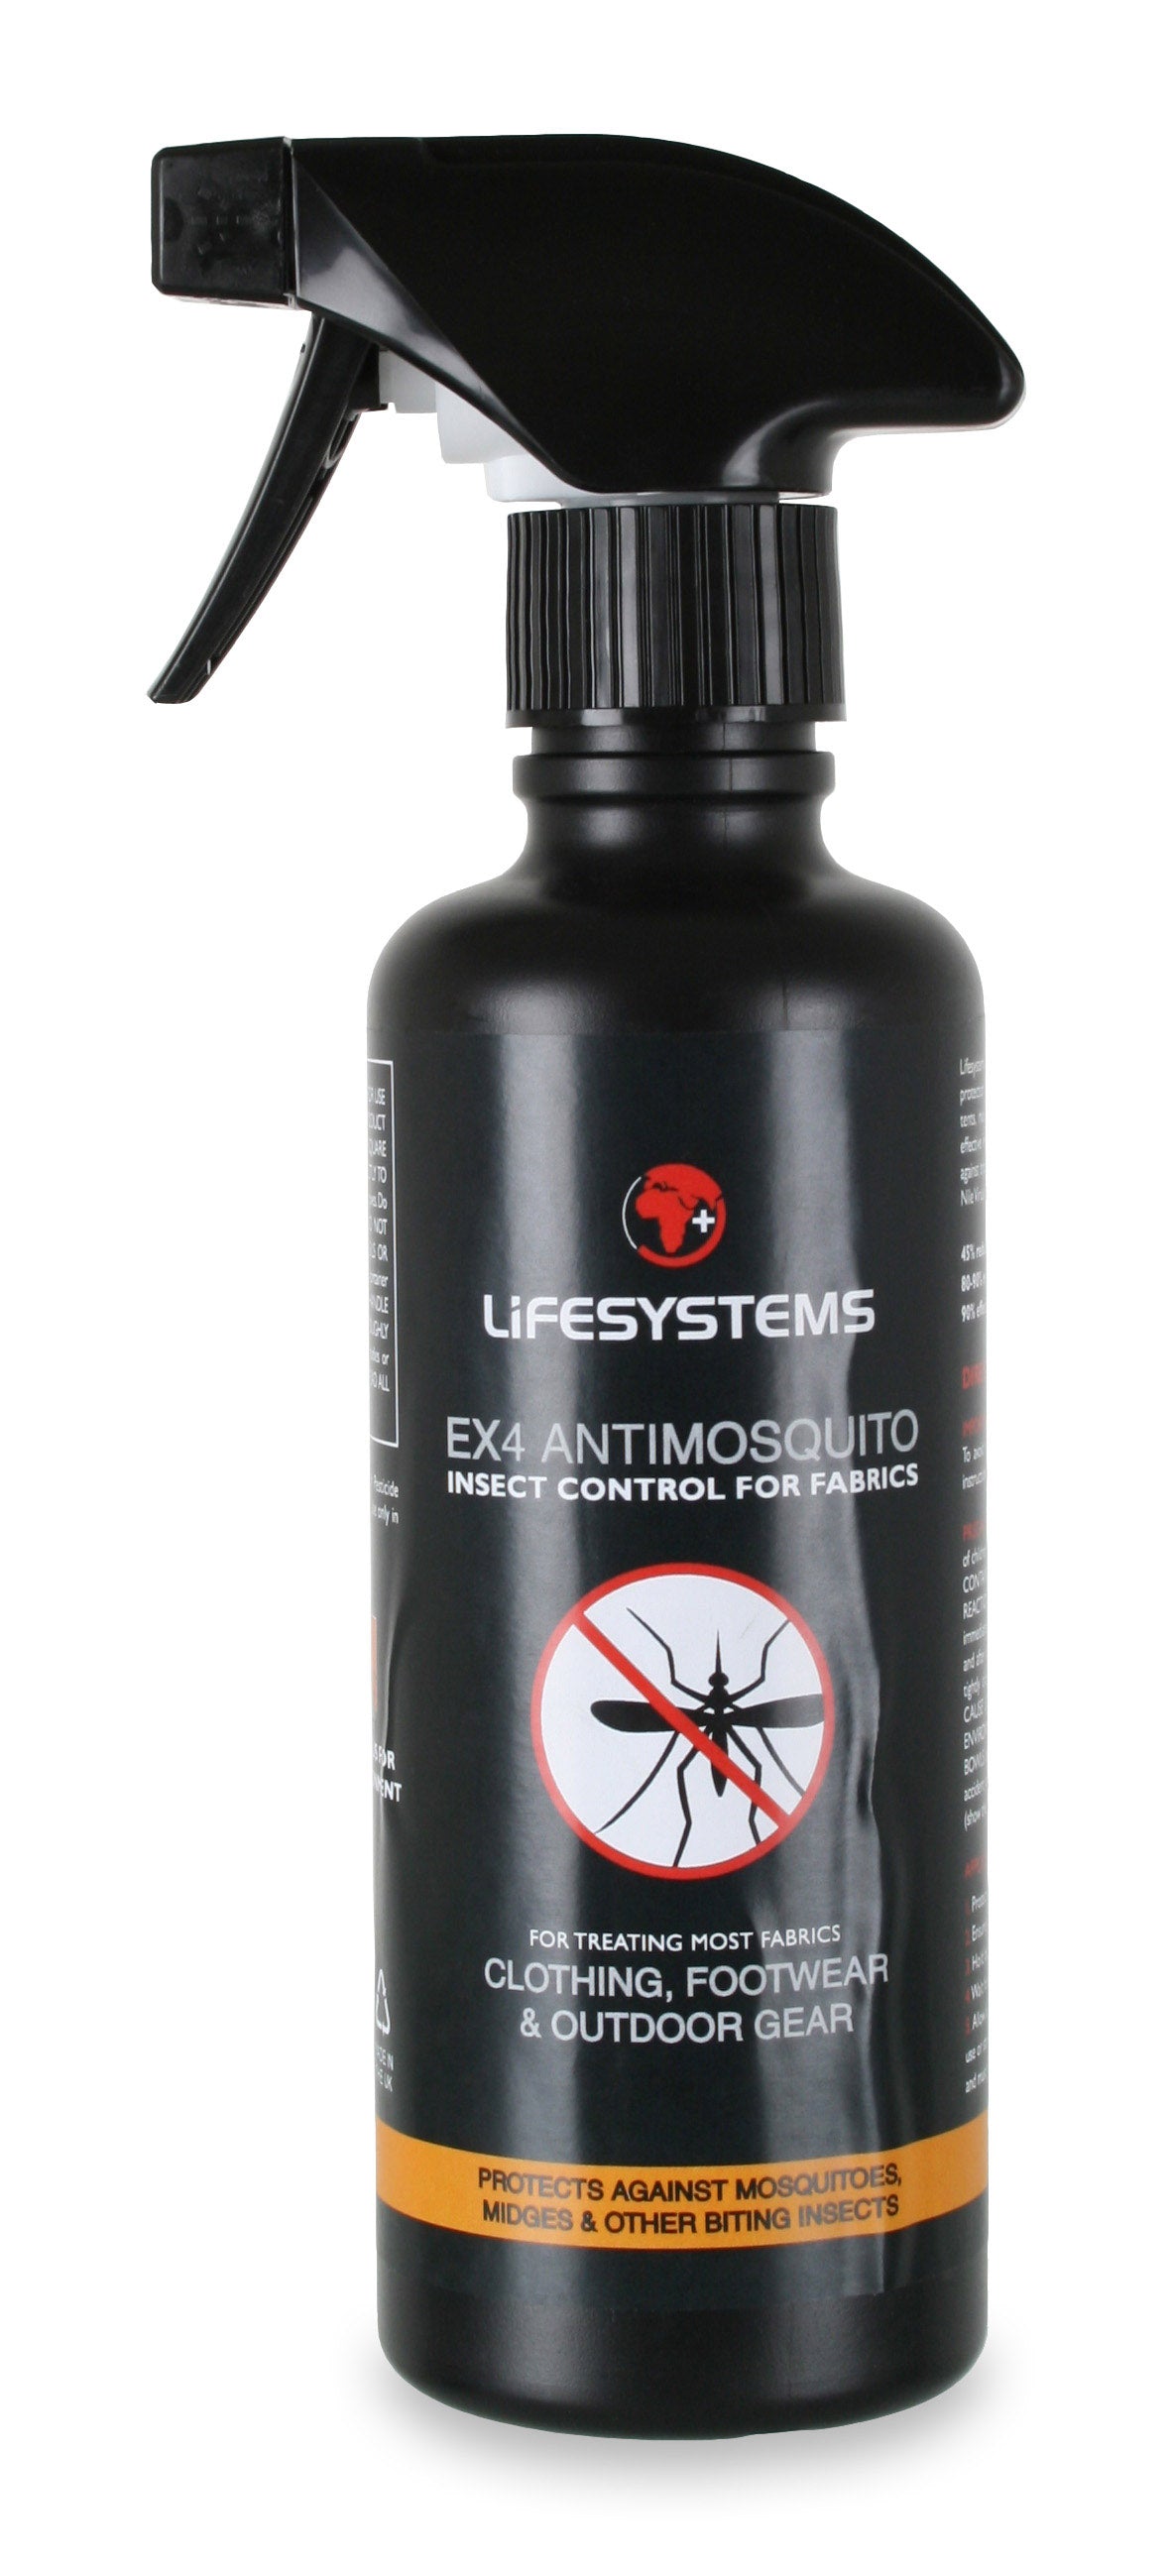 Lifesystems EX4 Anti Mosquito Fabric Treatment | Insect Repellents NZ